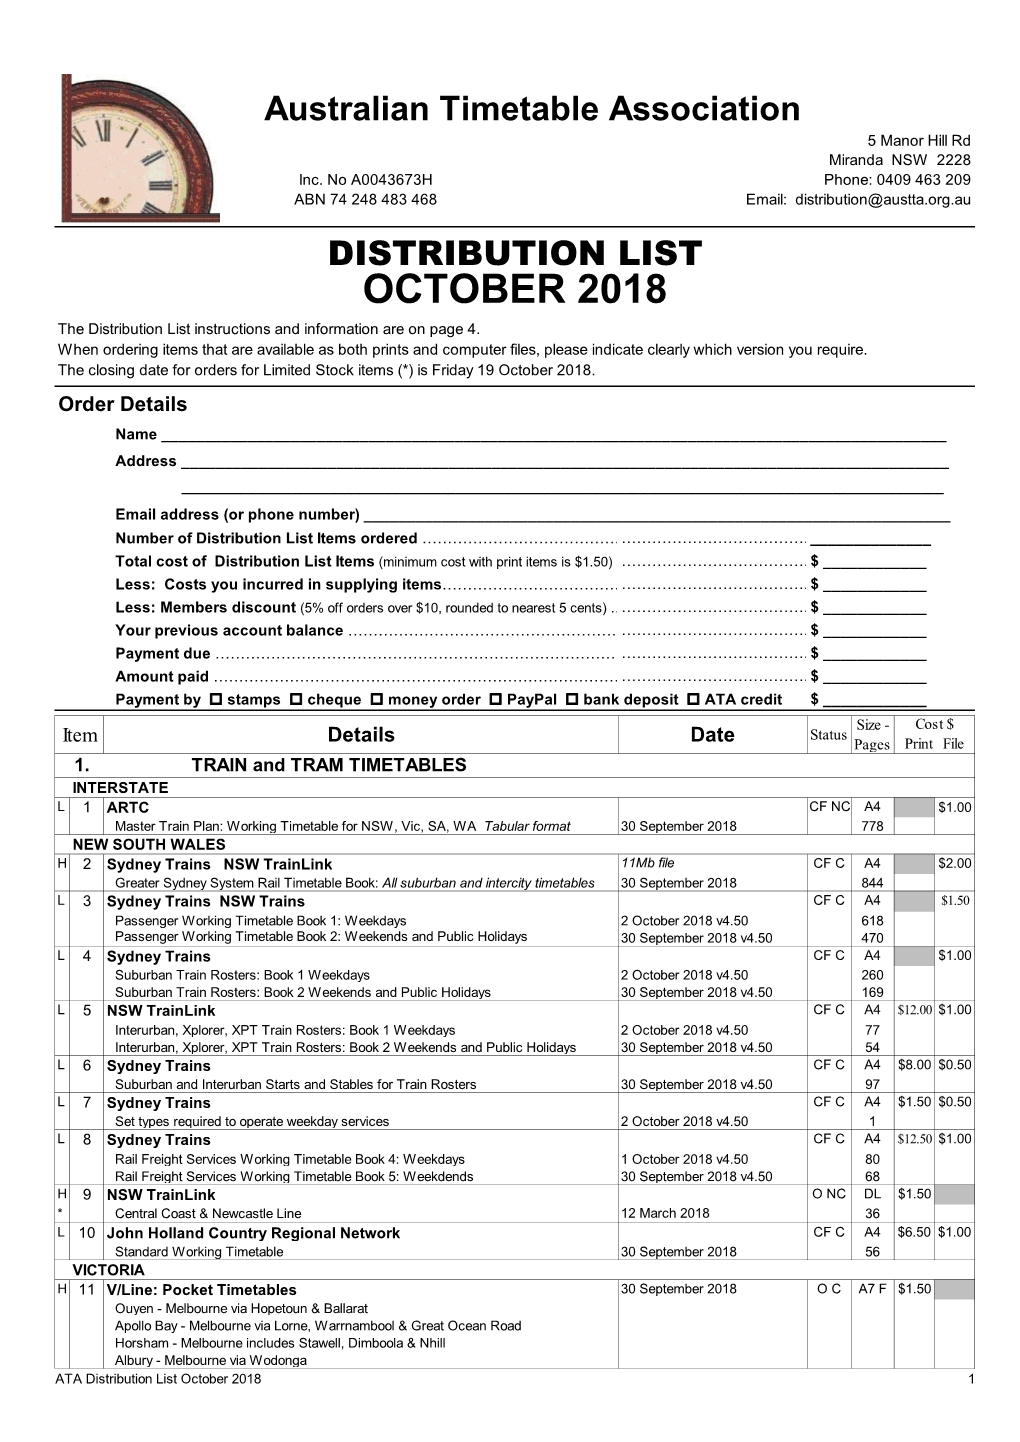 OCTOBER 2018 the Distribution List Instructions and Information Are on Page 4